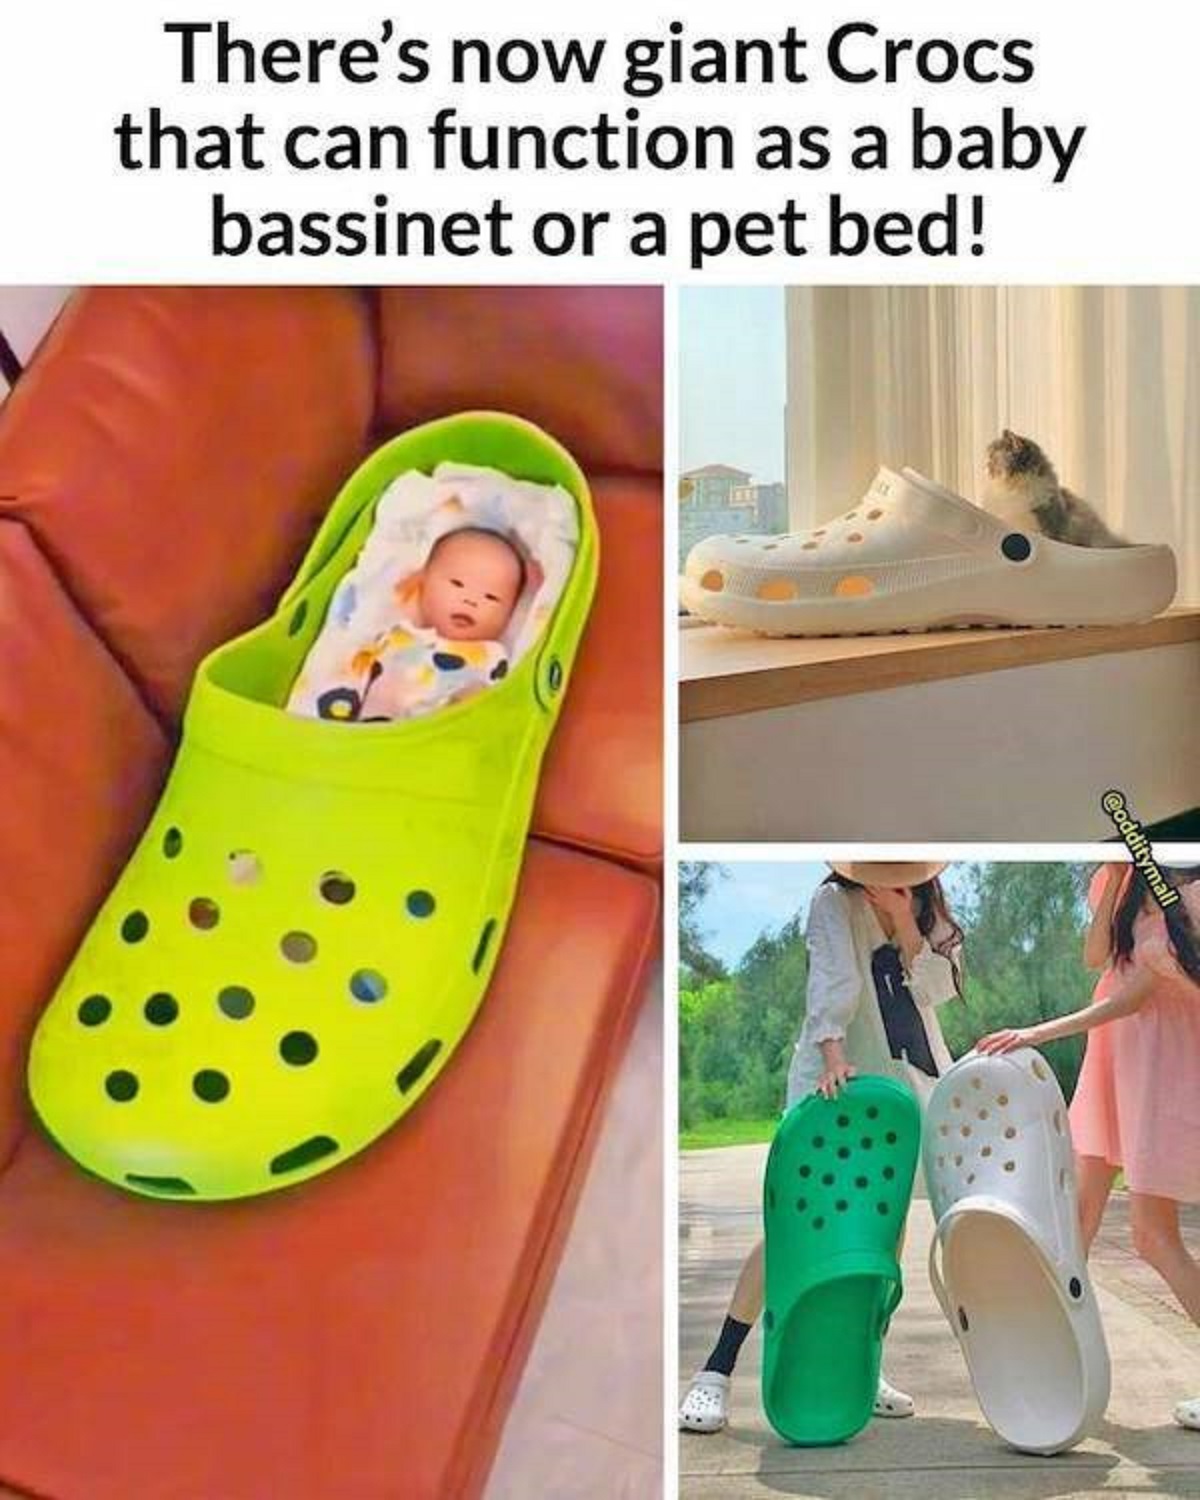 There's now giant Crocs that can function as a baby bassinet or a pet bed!